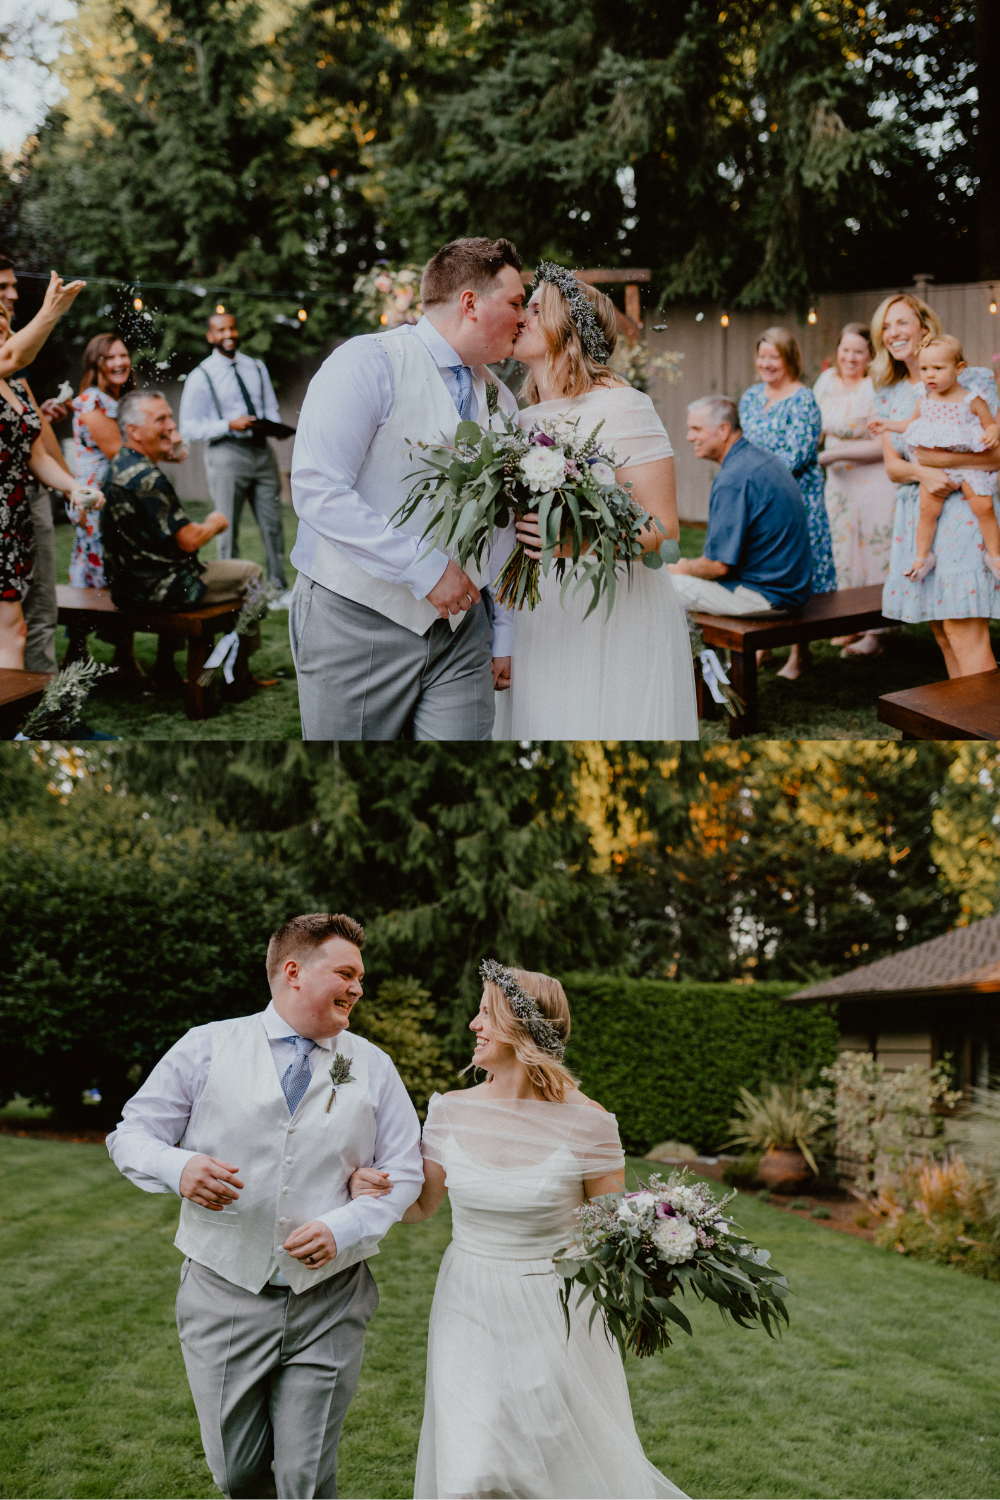 Bride and Groom kiss after exchanging their vows in intimate backyard elopement ceremony, backyard wedding ideas | Seattle Wedding Photographer, Seattle Elopement Photographer | chelseaabril.com